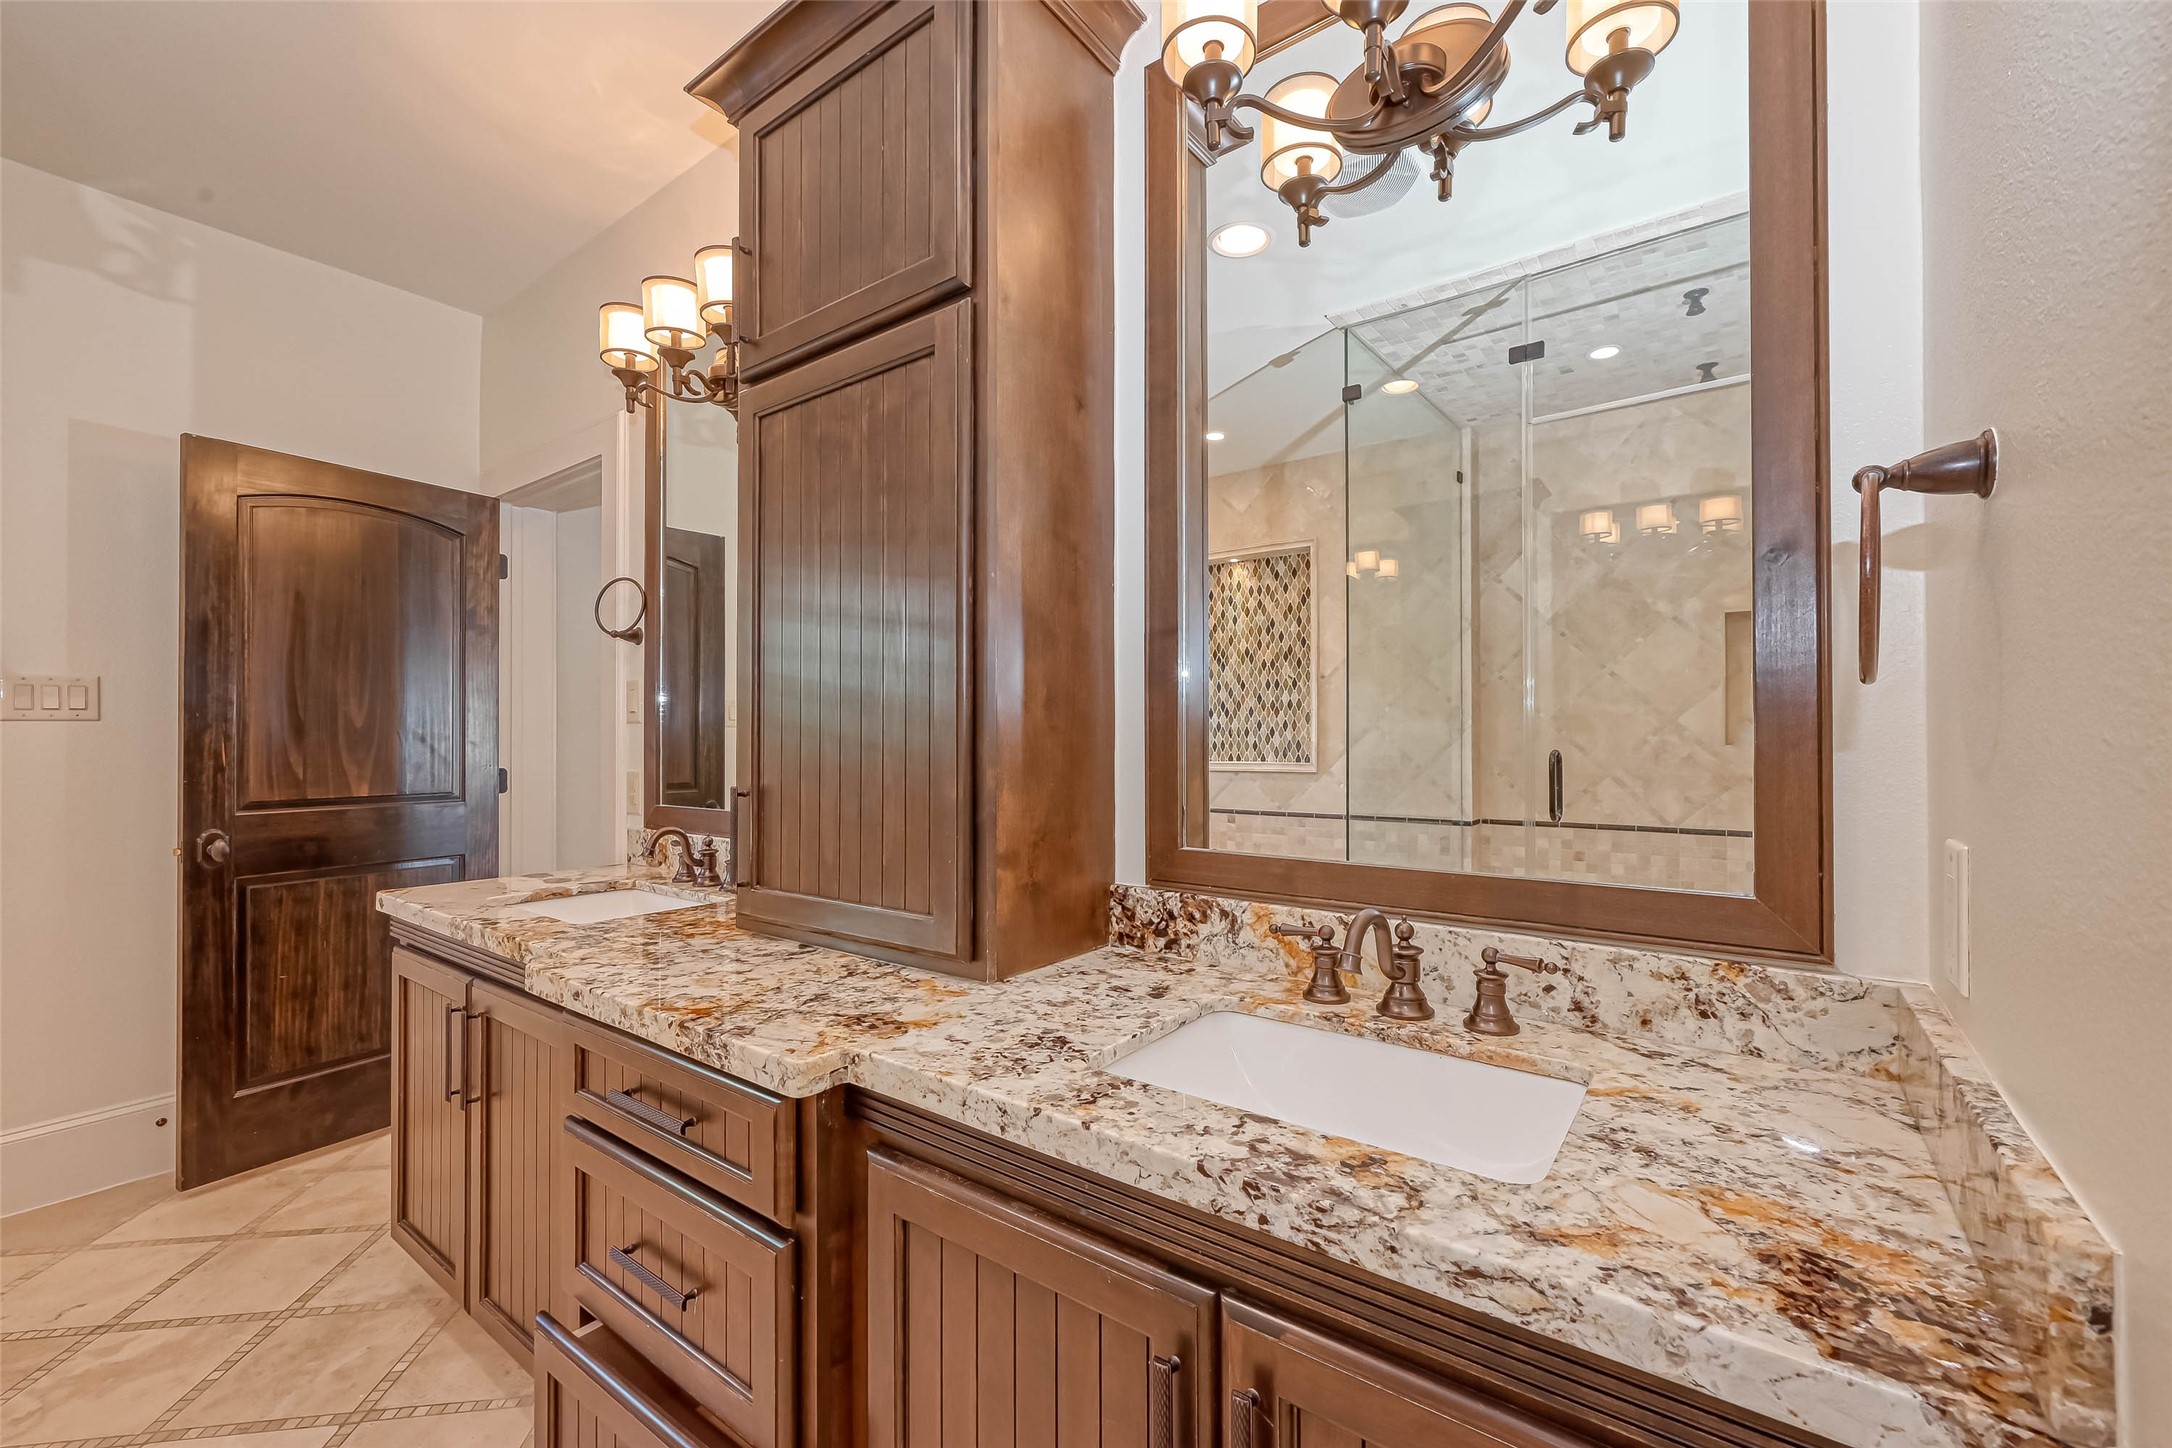 Primary bath with double sinks, granite counters and a storage tower